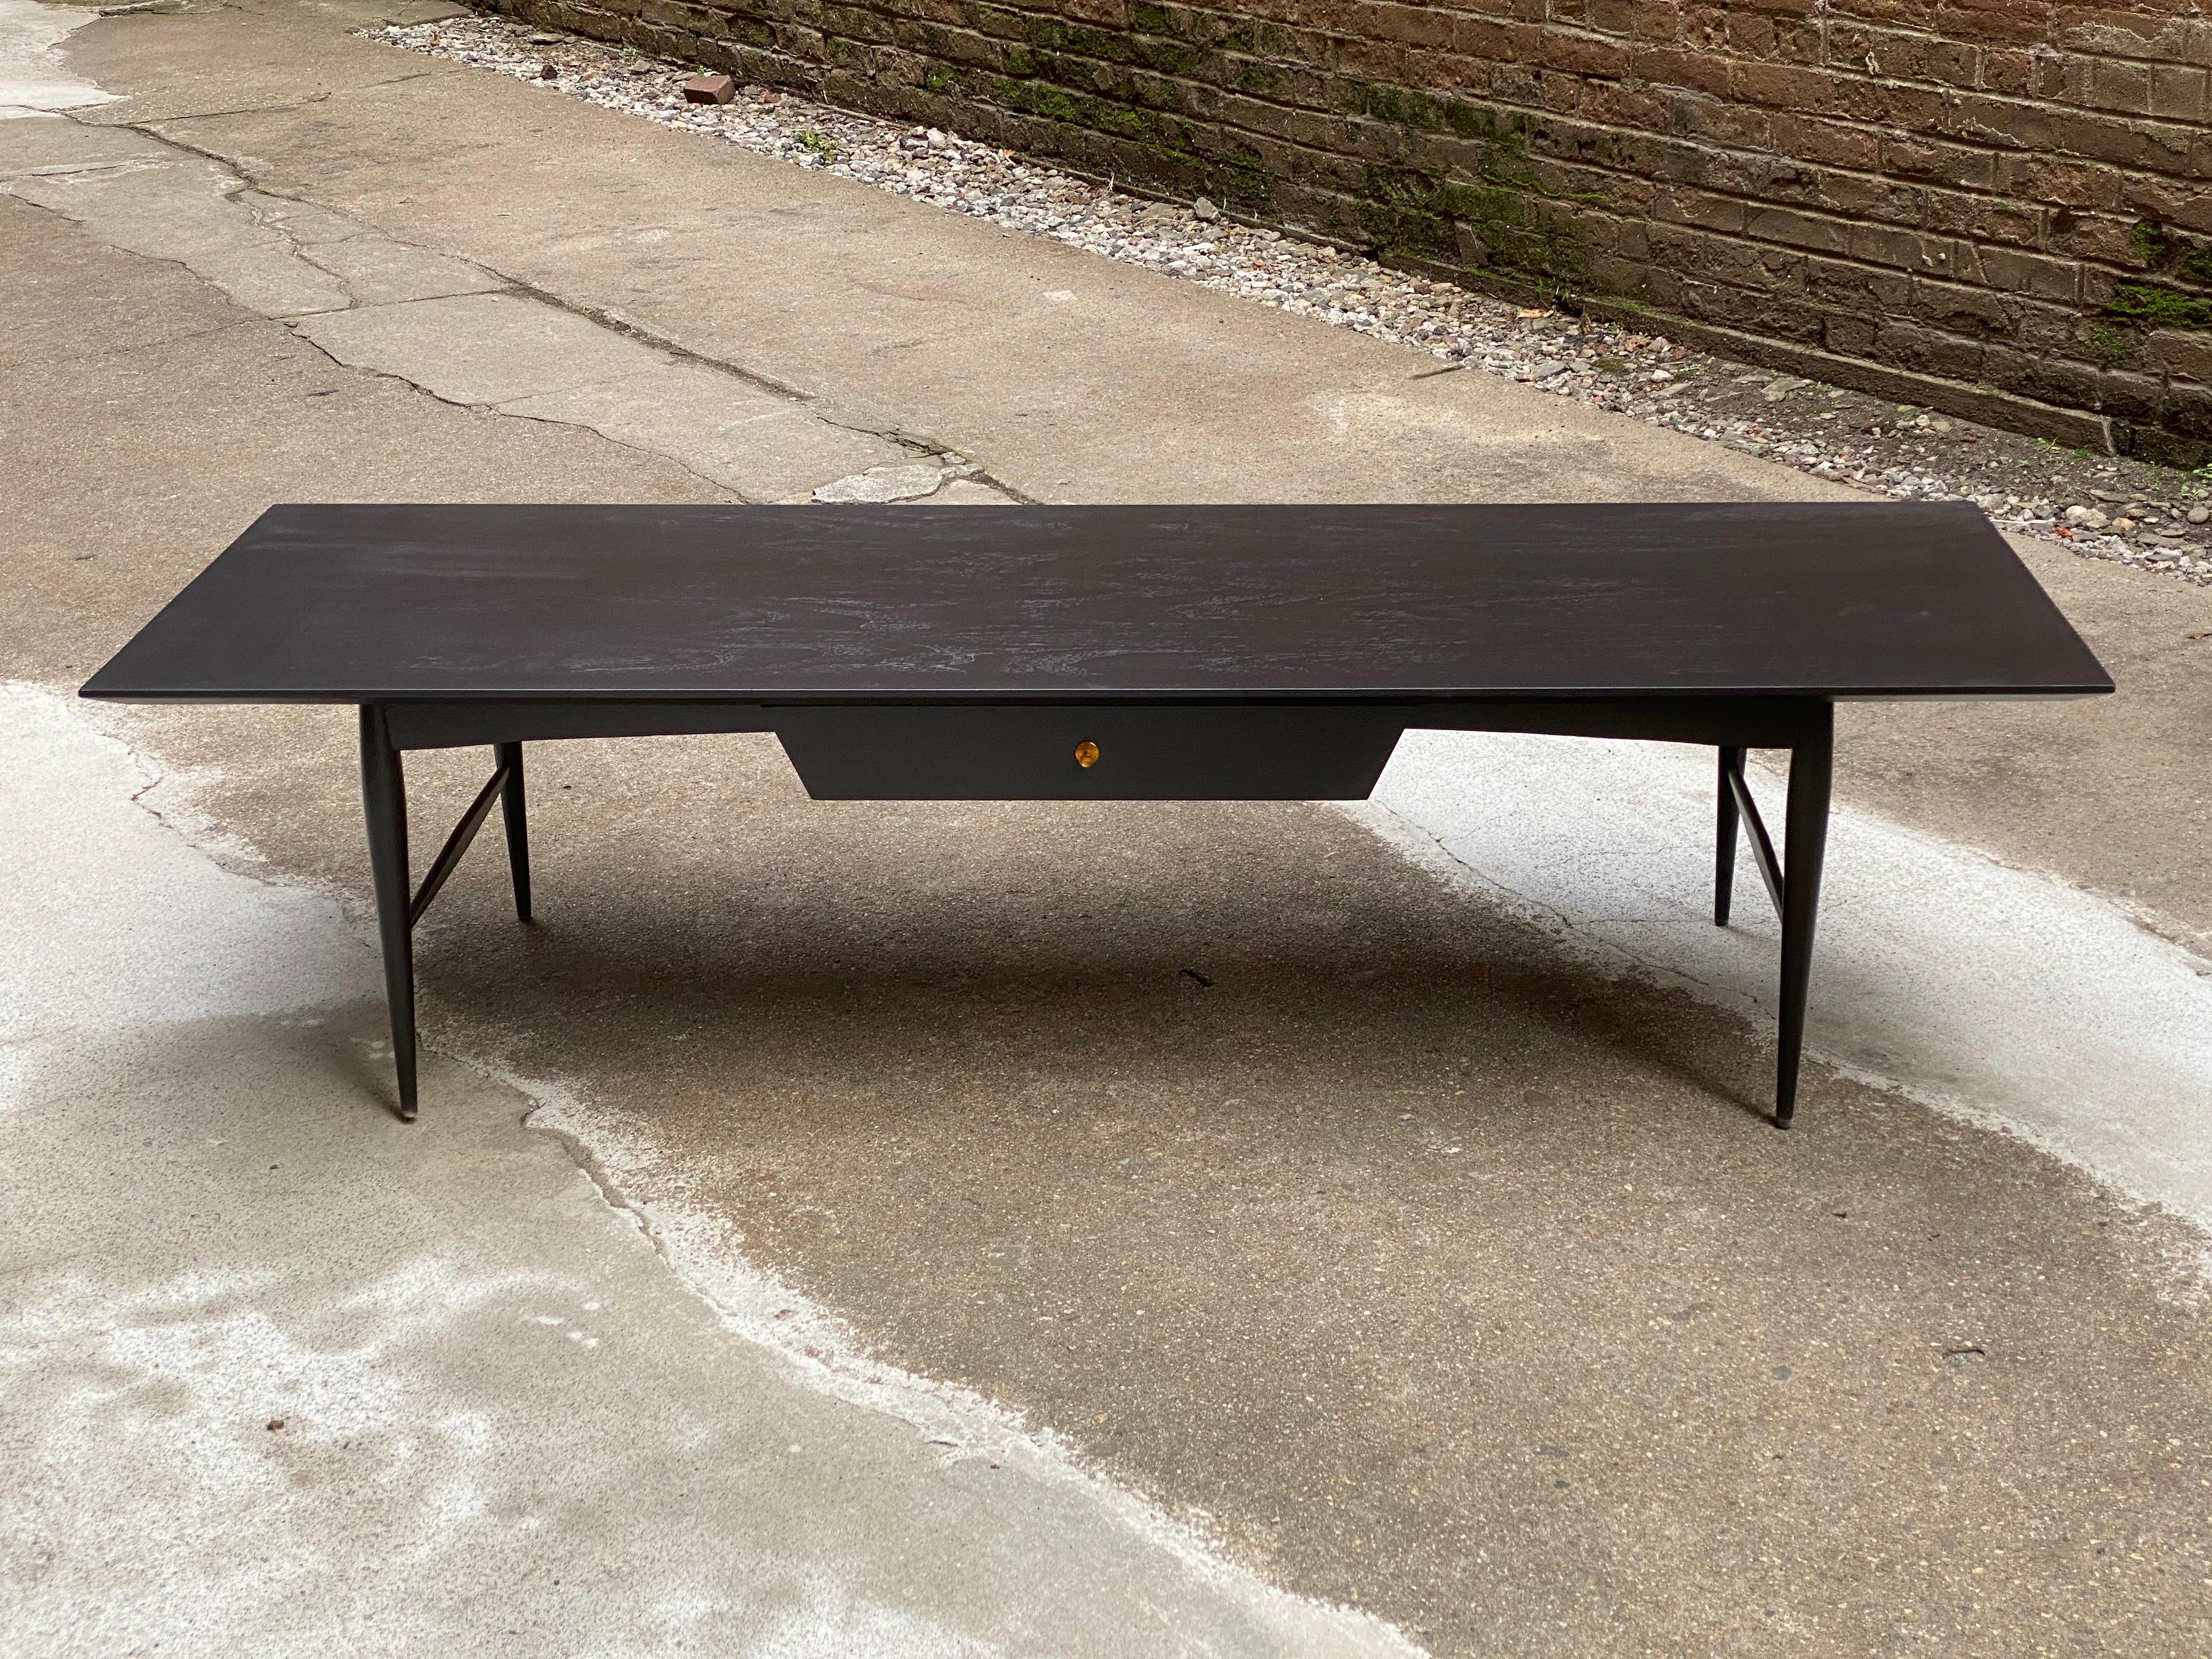 Large rectangular top ebonized finish coffee table with one drawer and one false front. Copper finished pulls. Elegant tapered legs and stretcher base, circa 1960. Very nice condition.

Approximately 60